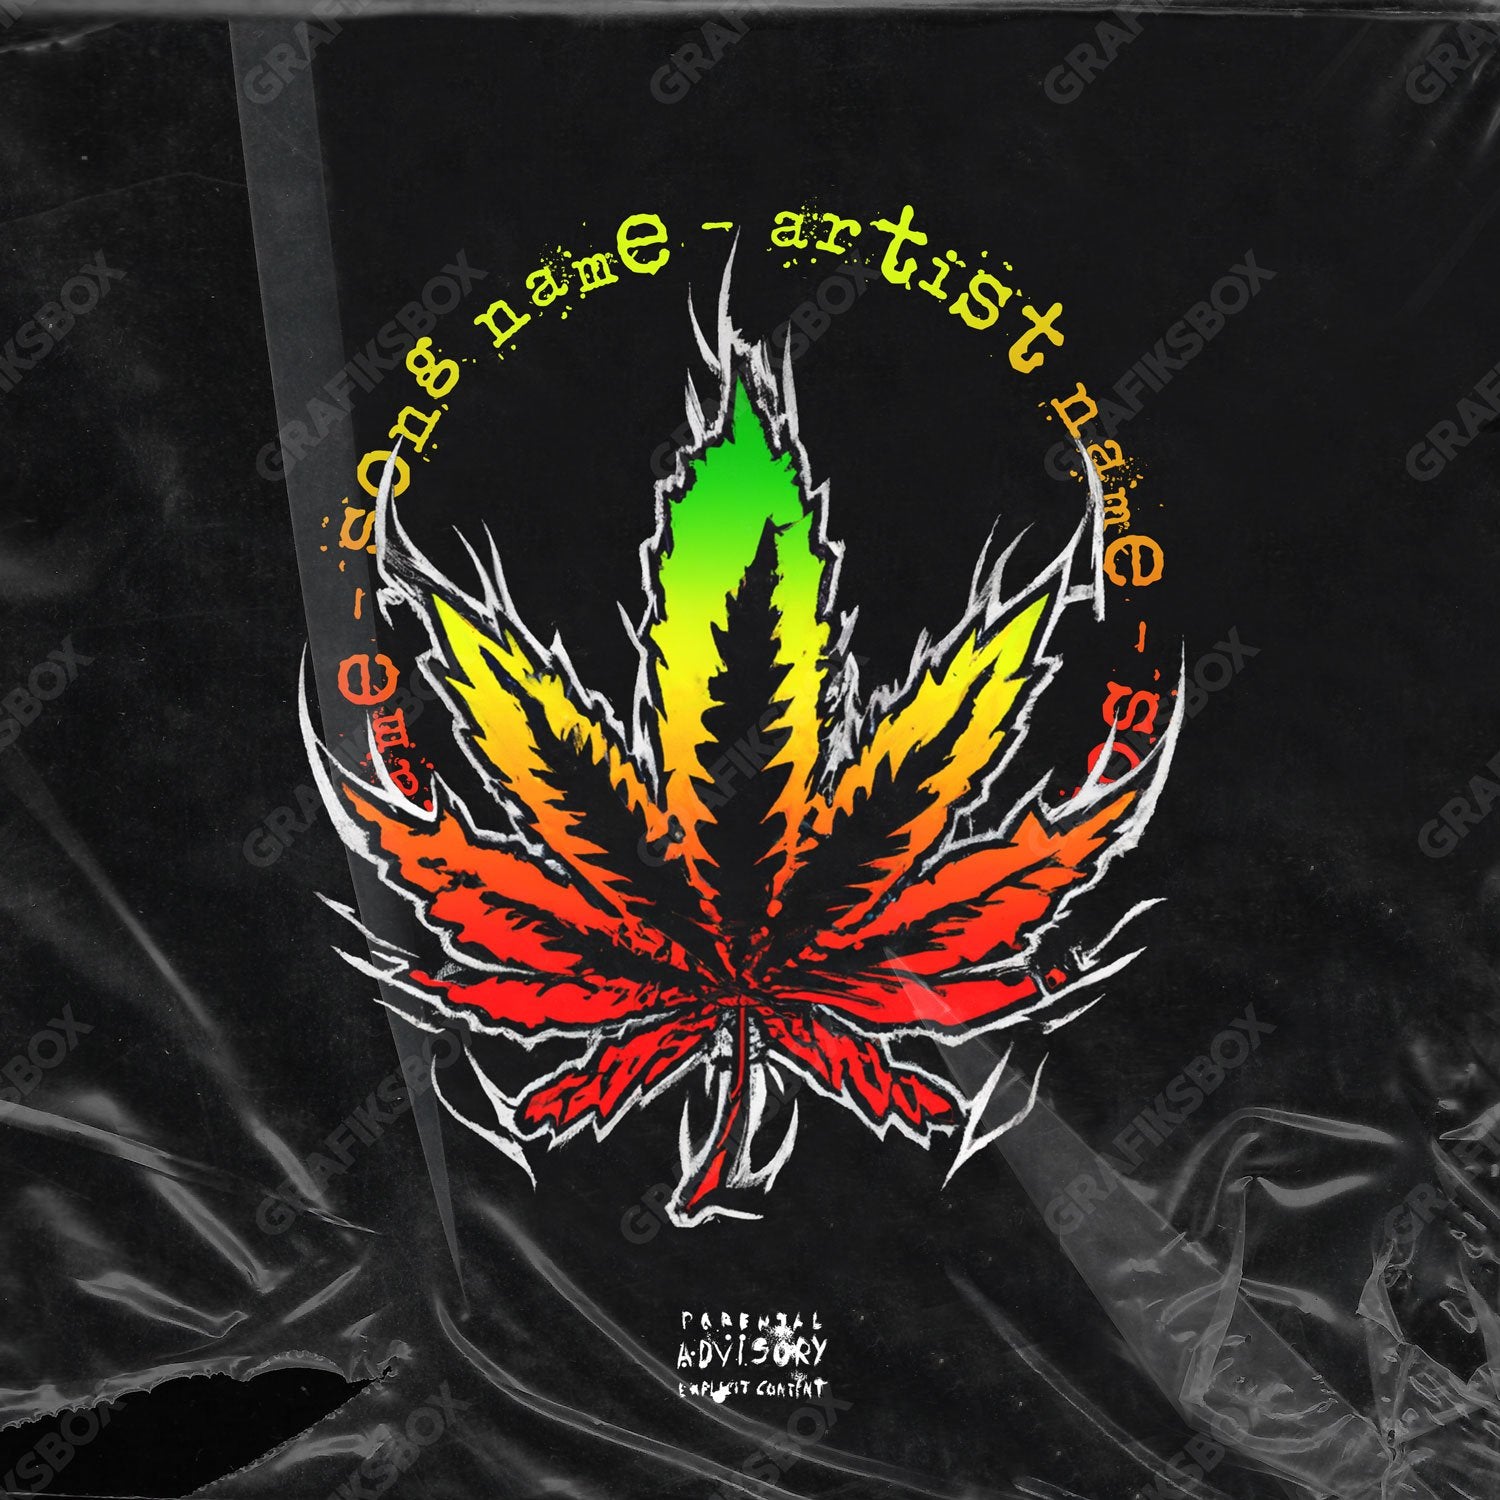 Weed Passion premade cover art